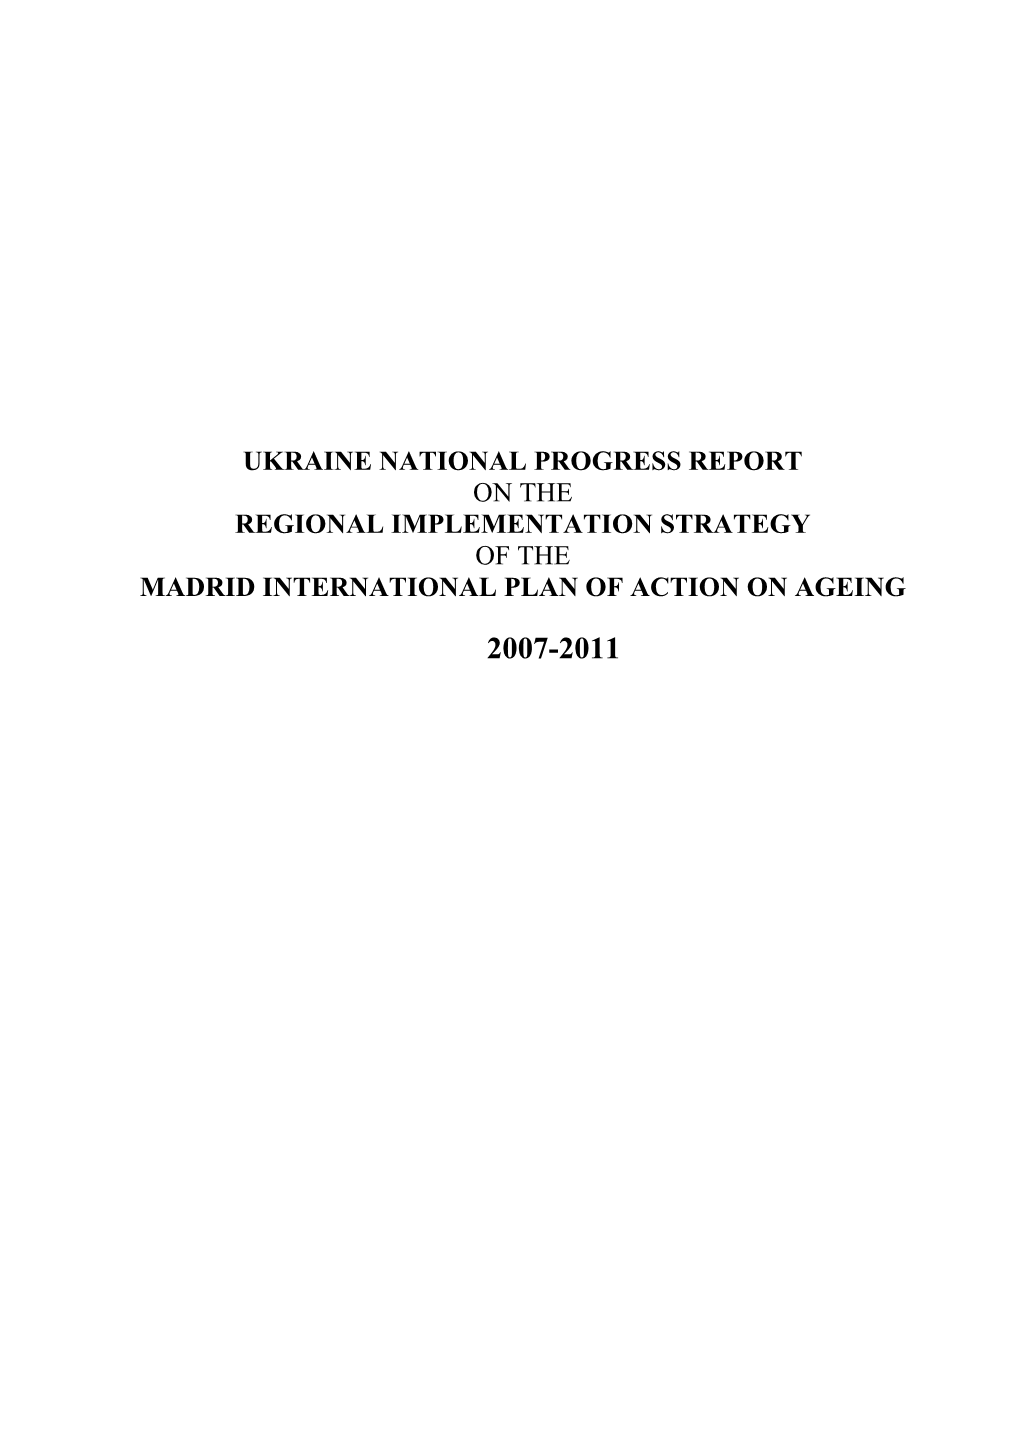 Ukraine National Progress Report on the Regional Implementation Strategy of the Madrid International Plan of Action on Ageing